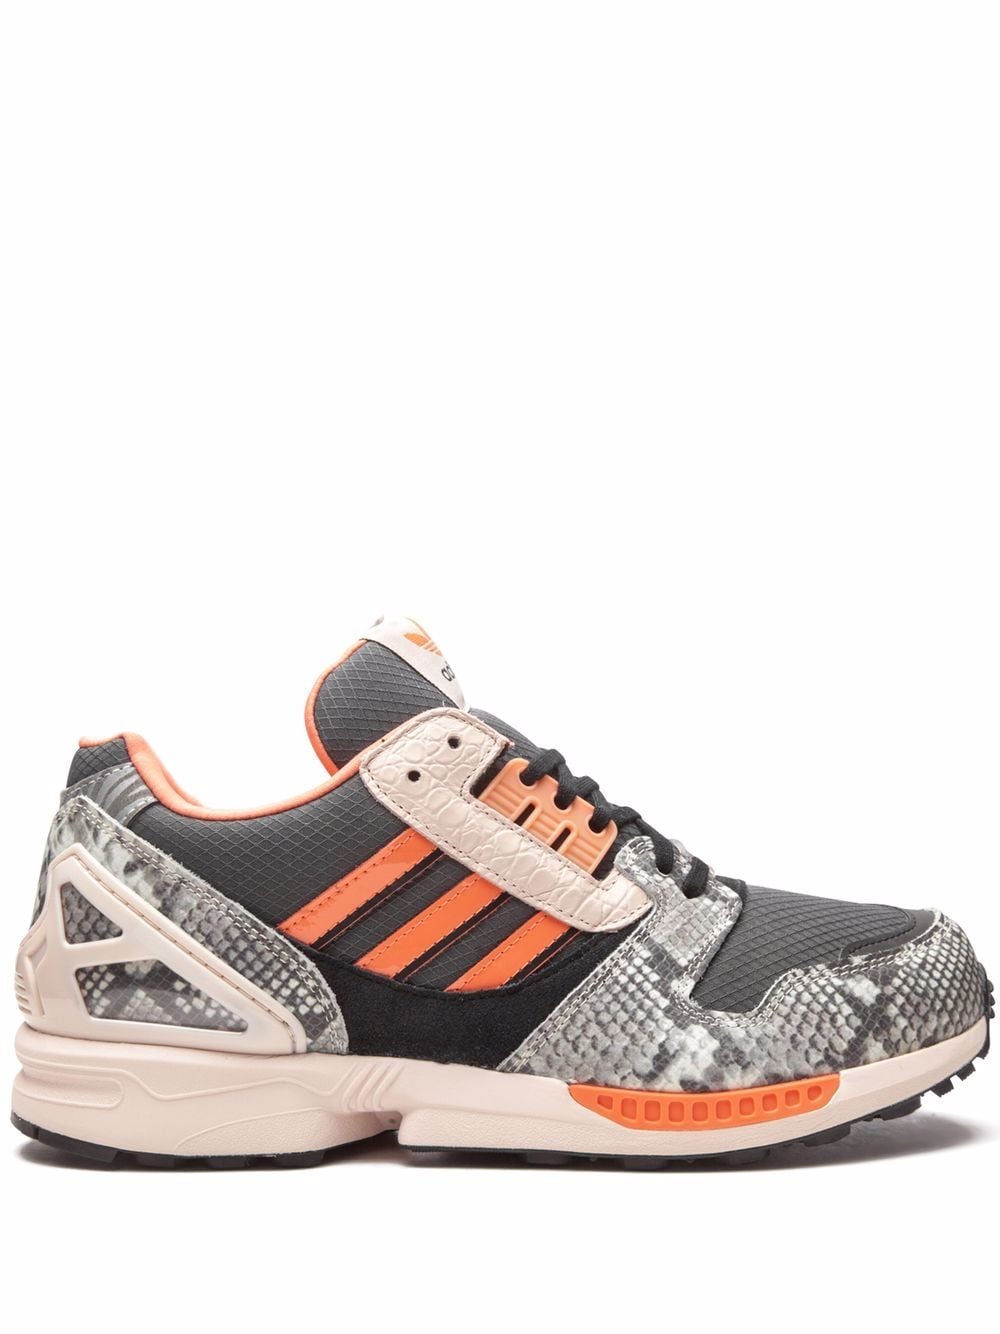 Image 1 of adidas ZX 8000 low-top sneakers